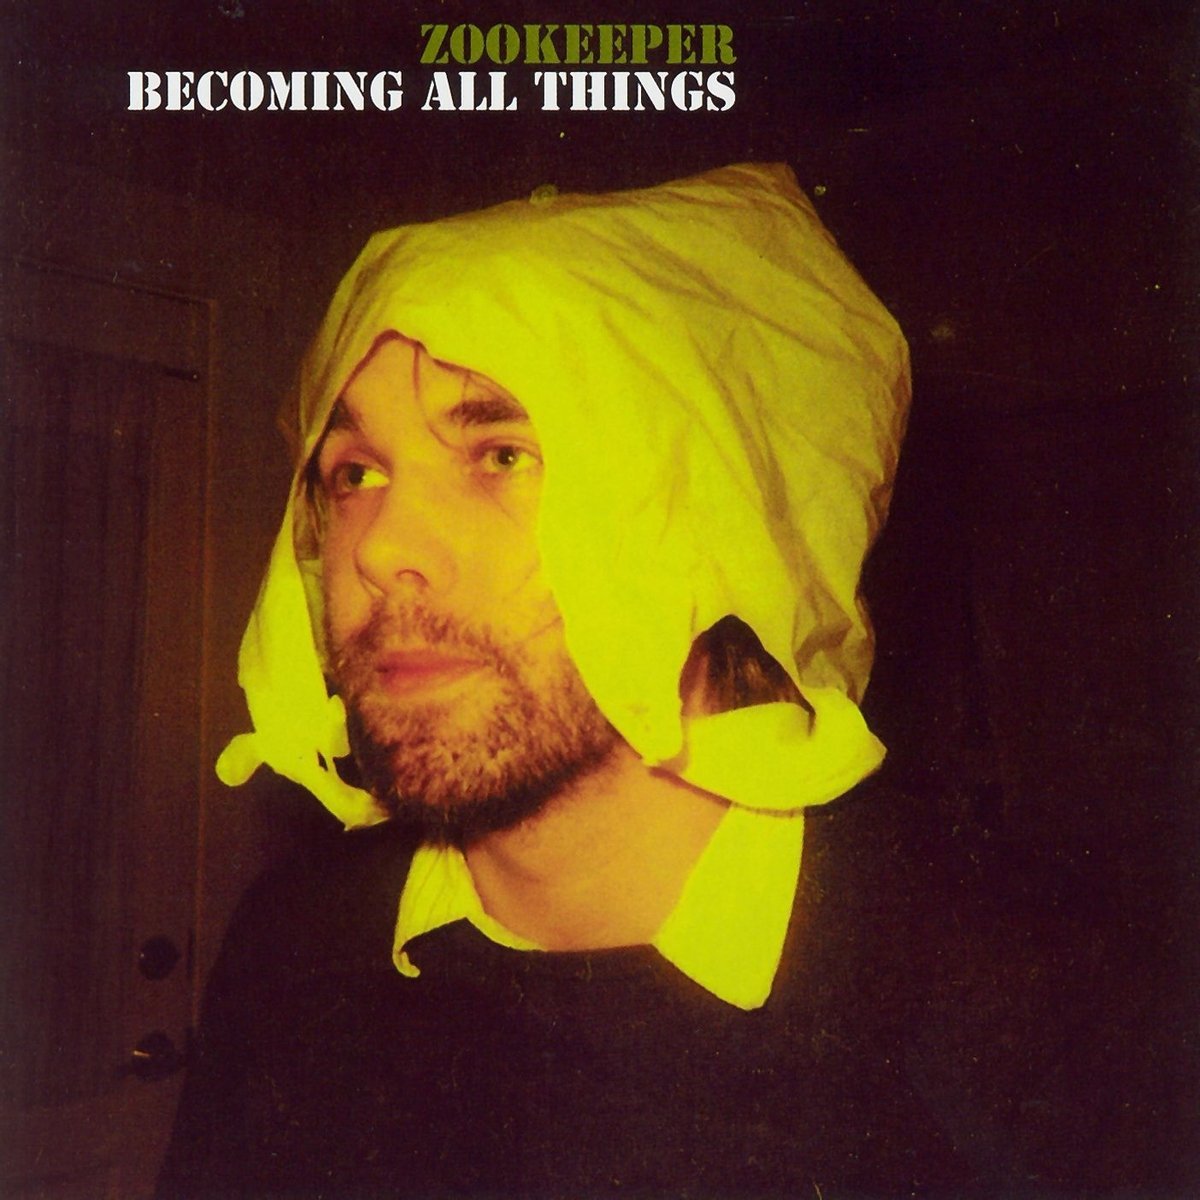 Zookeeper - Becoming All Things Music CDs Vinyl